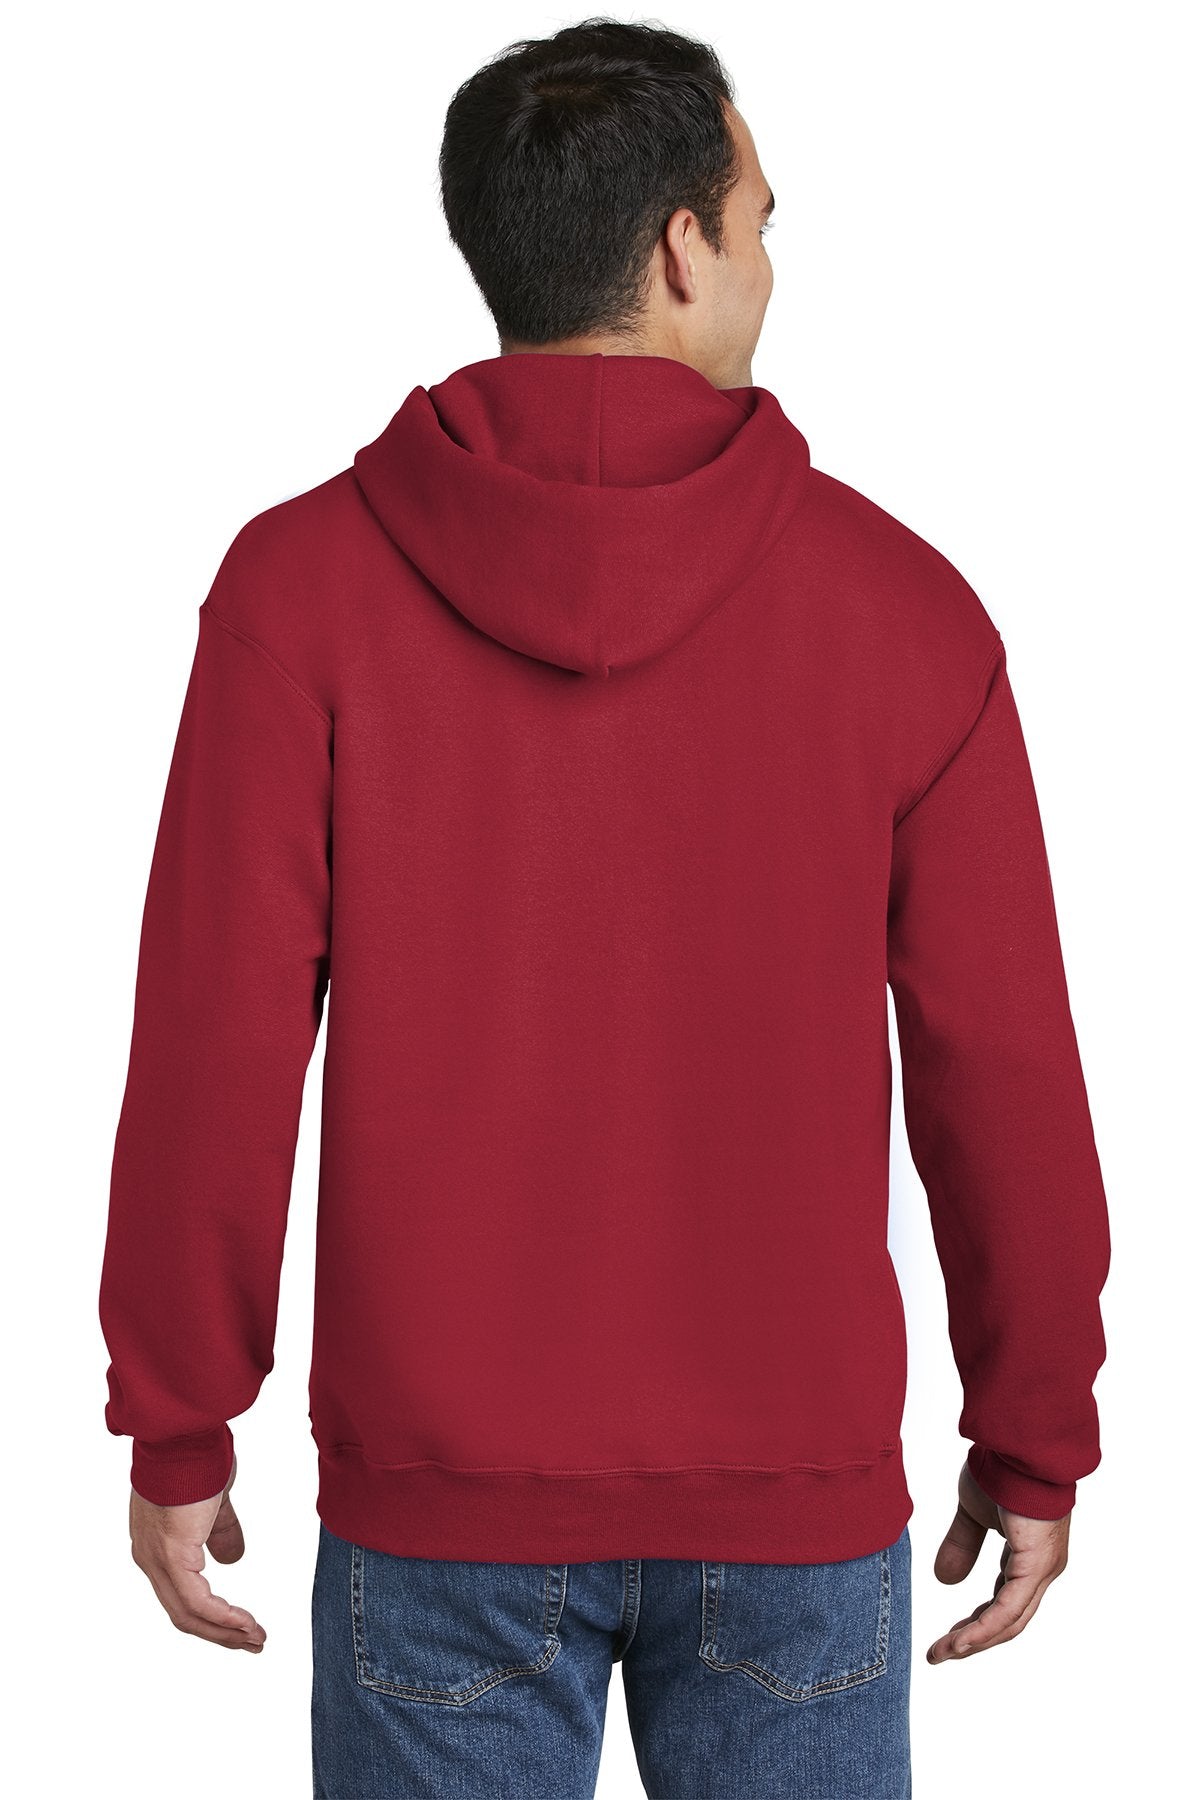 Hanes Ultimate Cotton Pullover Hooded Sweatshirt F170 Deep Red